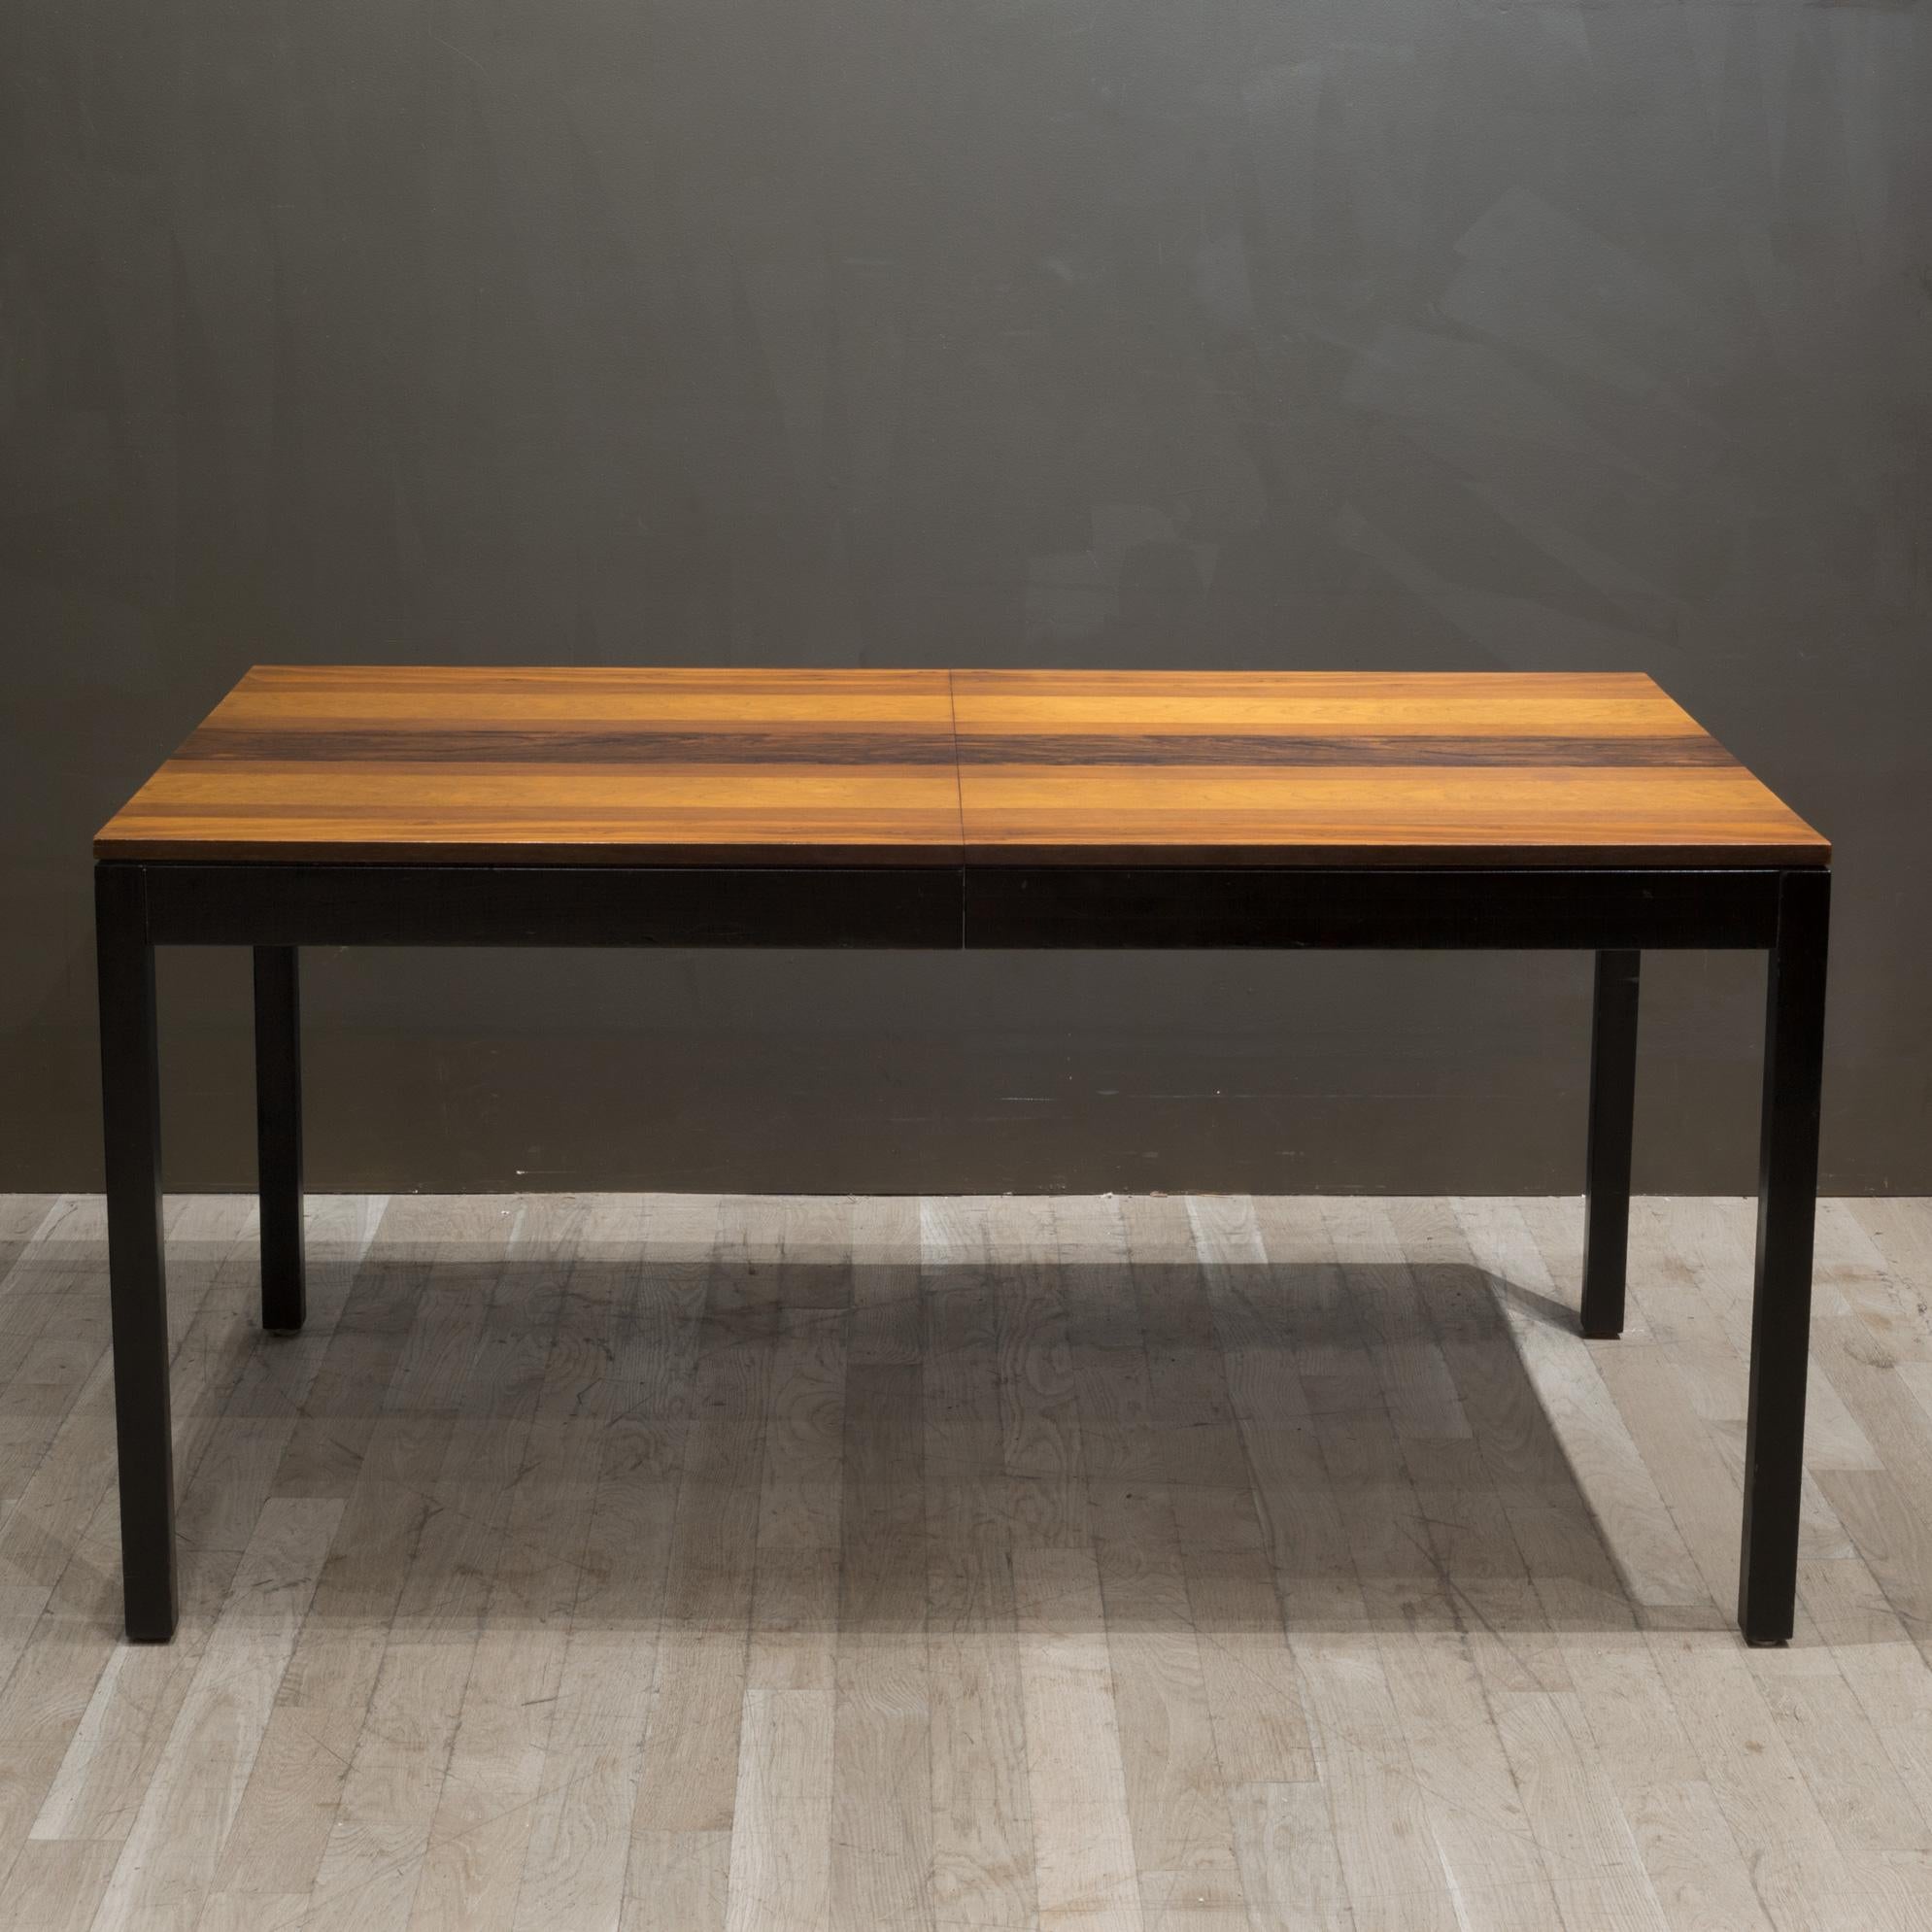 About

An original Milo Baughman Parsons dining table by Directional Furniture with a striped veneer top of Rosewood, Teak and Walnut over a black lacquer base. This dining table comes with one extension leaf to accommodate extra seating,